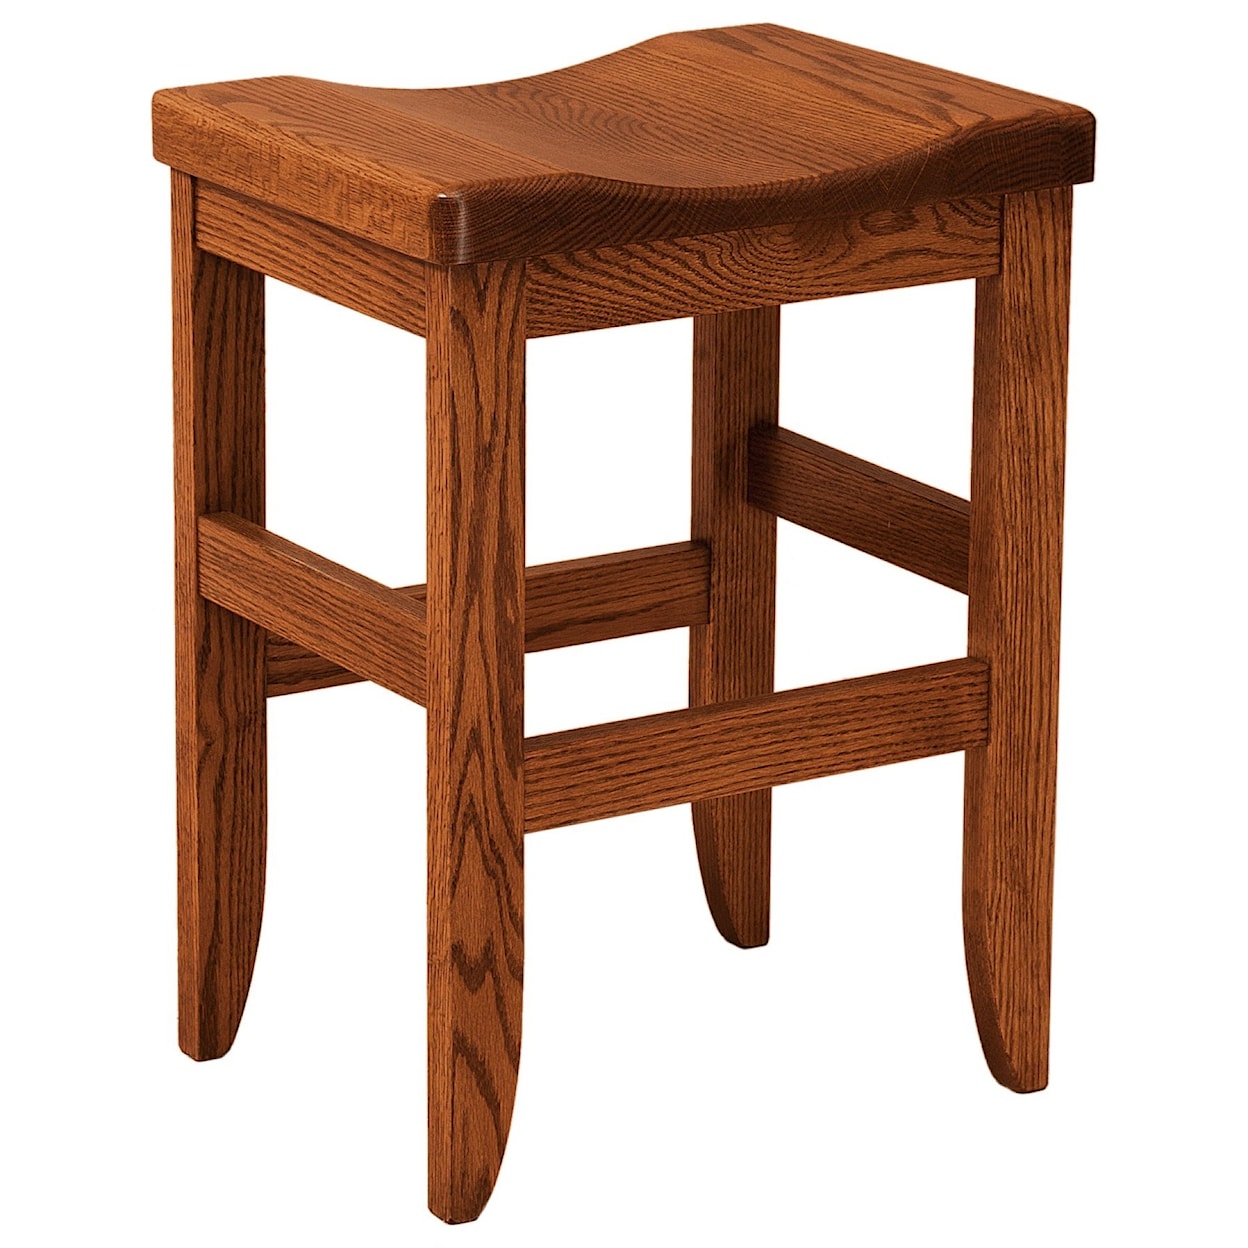 F&N Woodworking Clifton Bar Stool 24" Height - Wood Seat